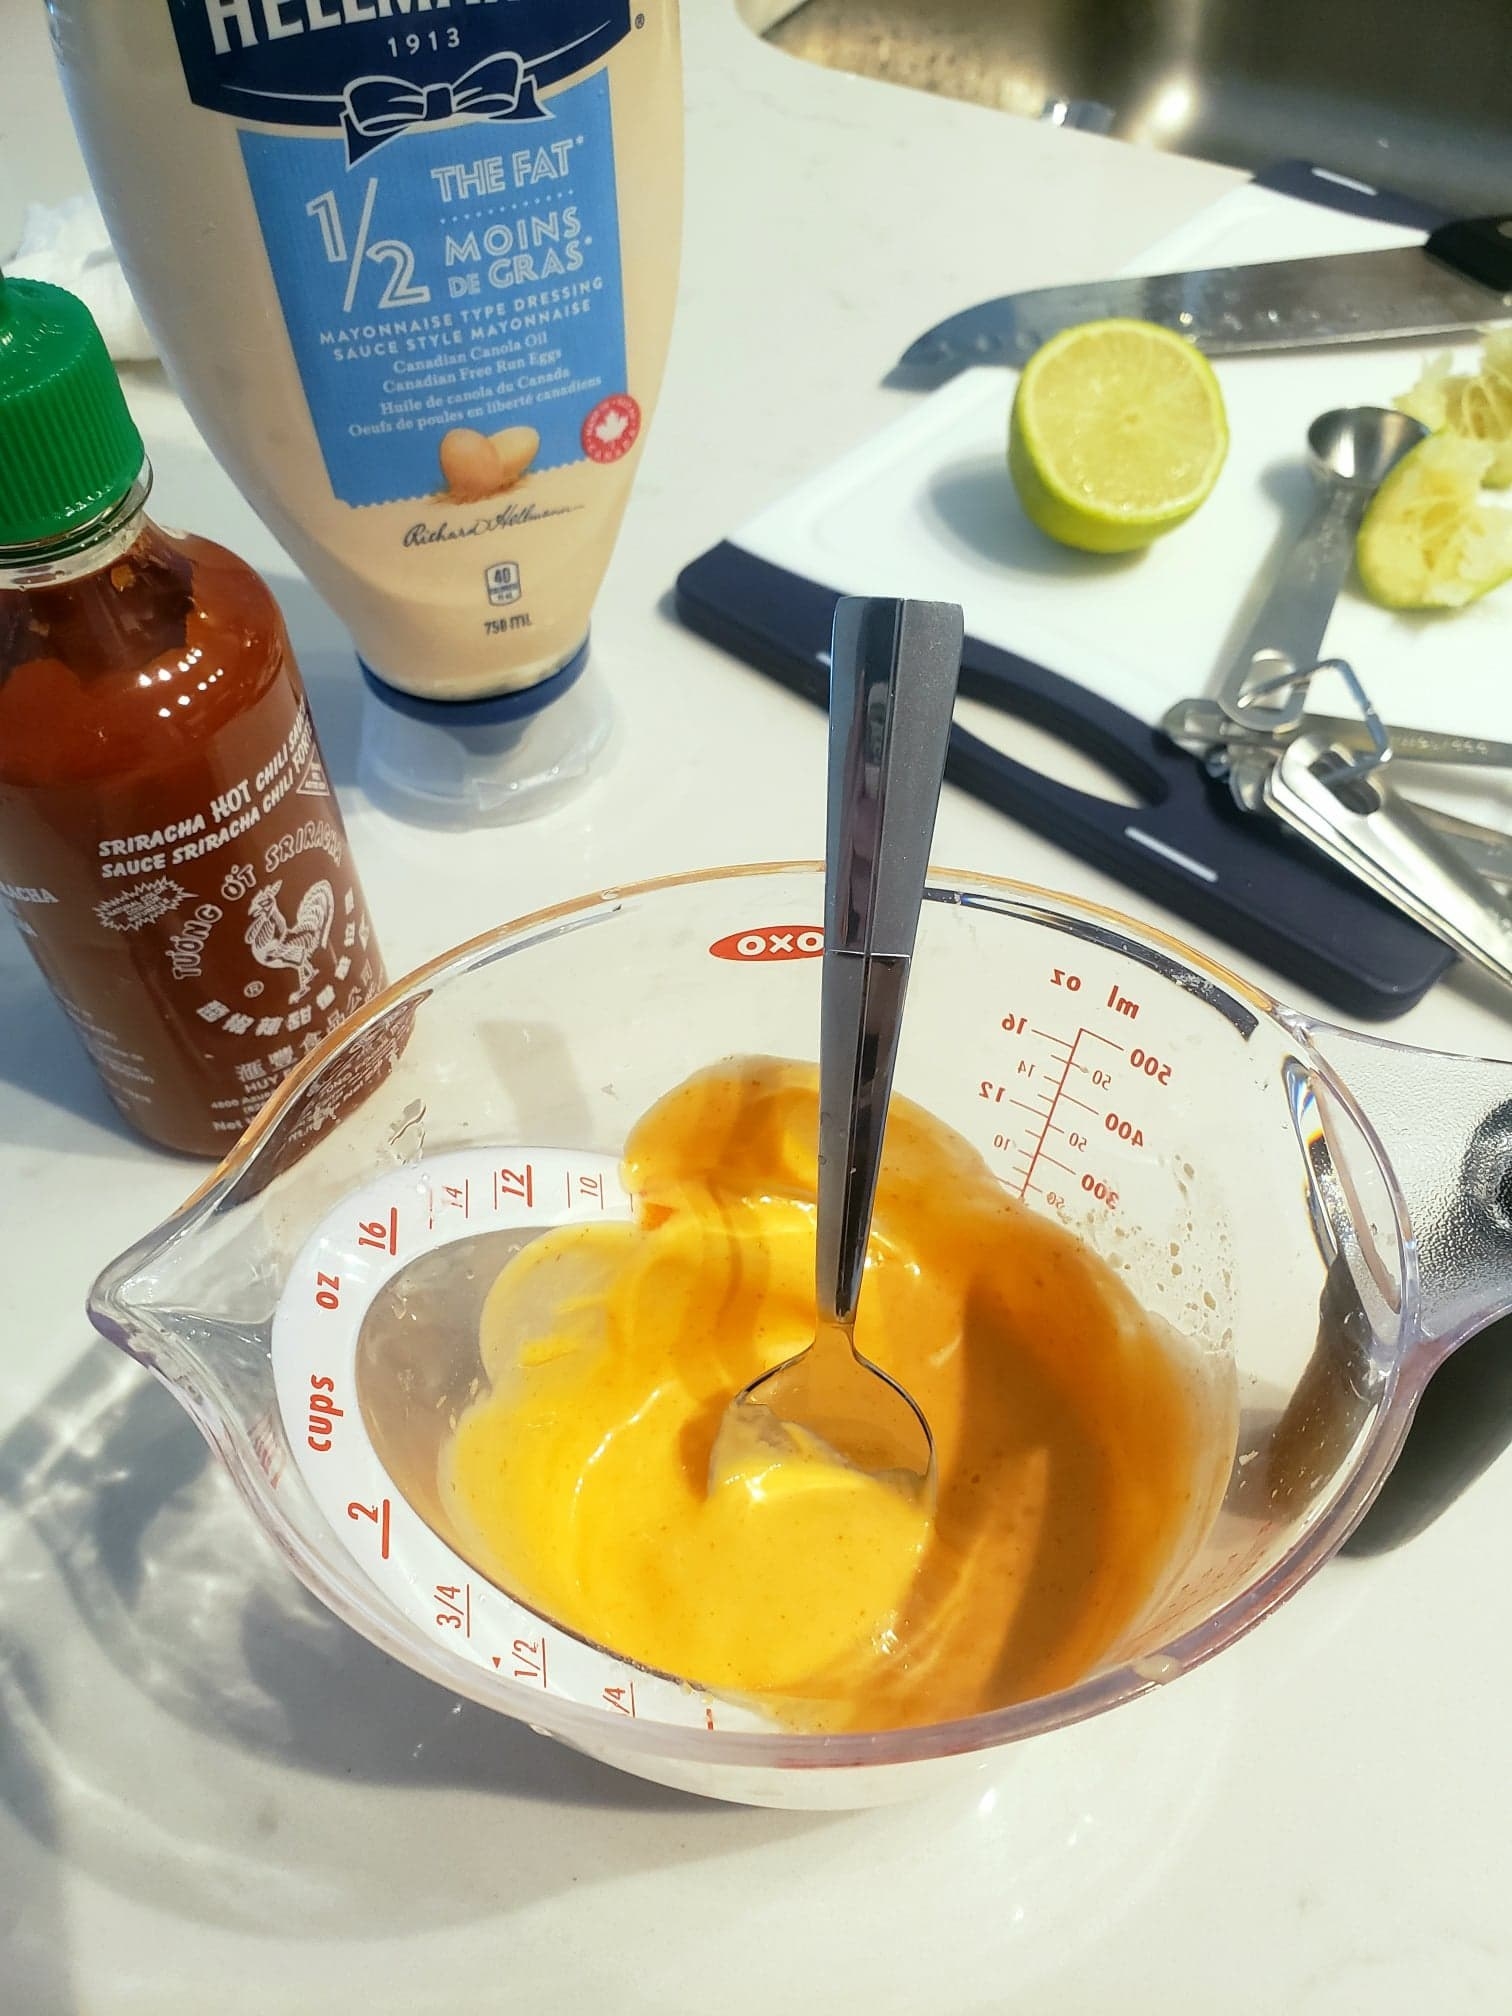 A measuring cup with Sriracha mayo freshly mixed inside, with the Sriracha bottle, mayonnaise bottle, and cut lime in the background